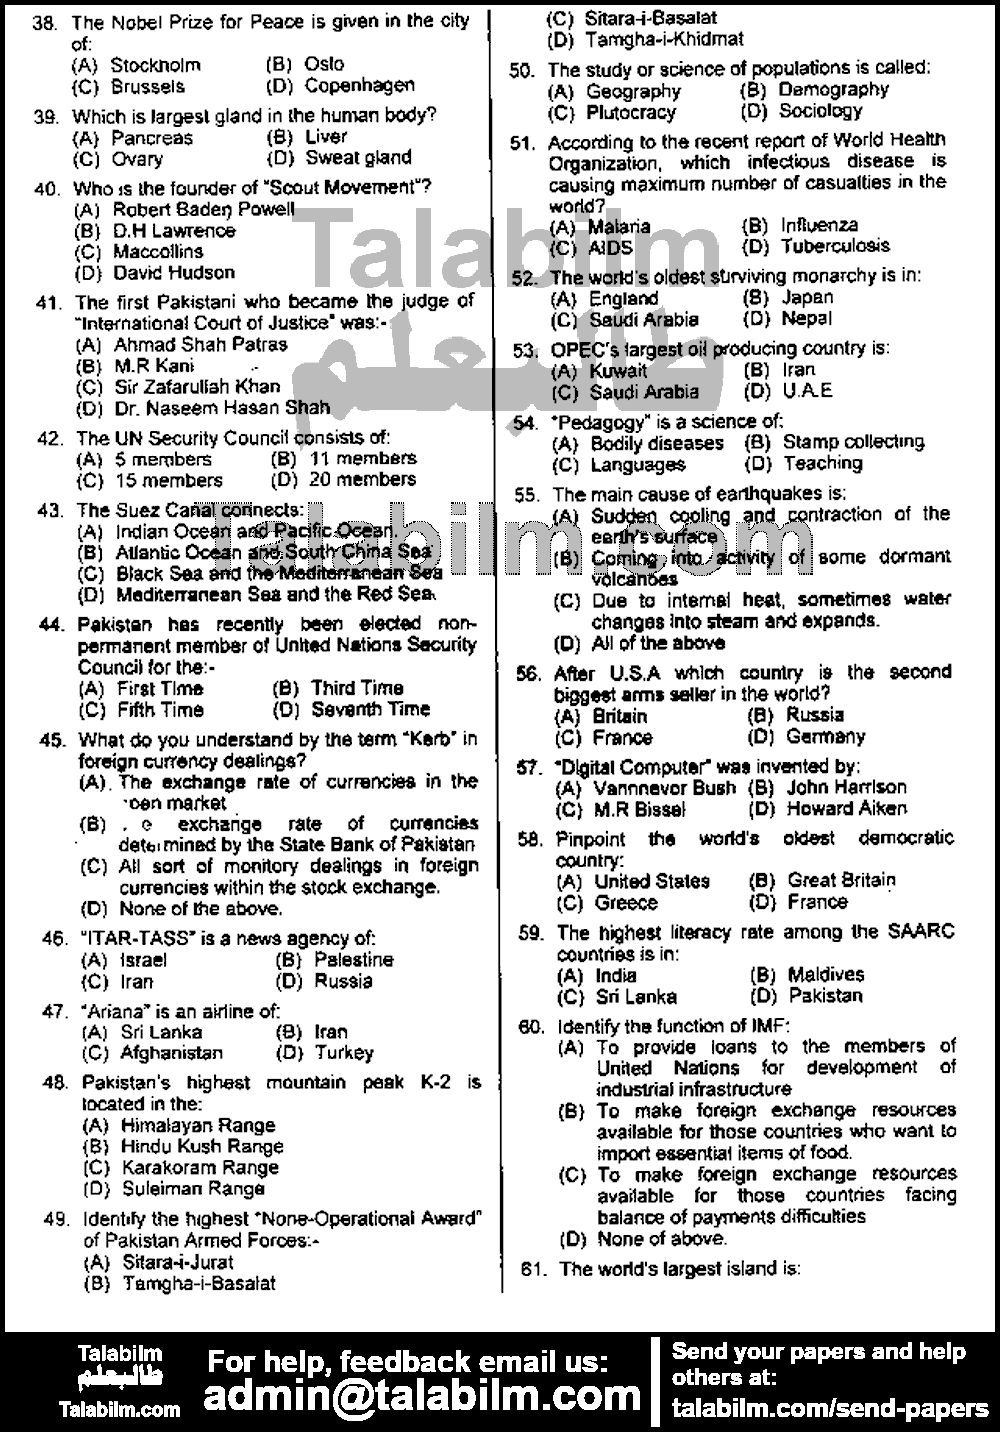 Tehsildar 0 past paper for 2012 Page No. 2